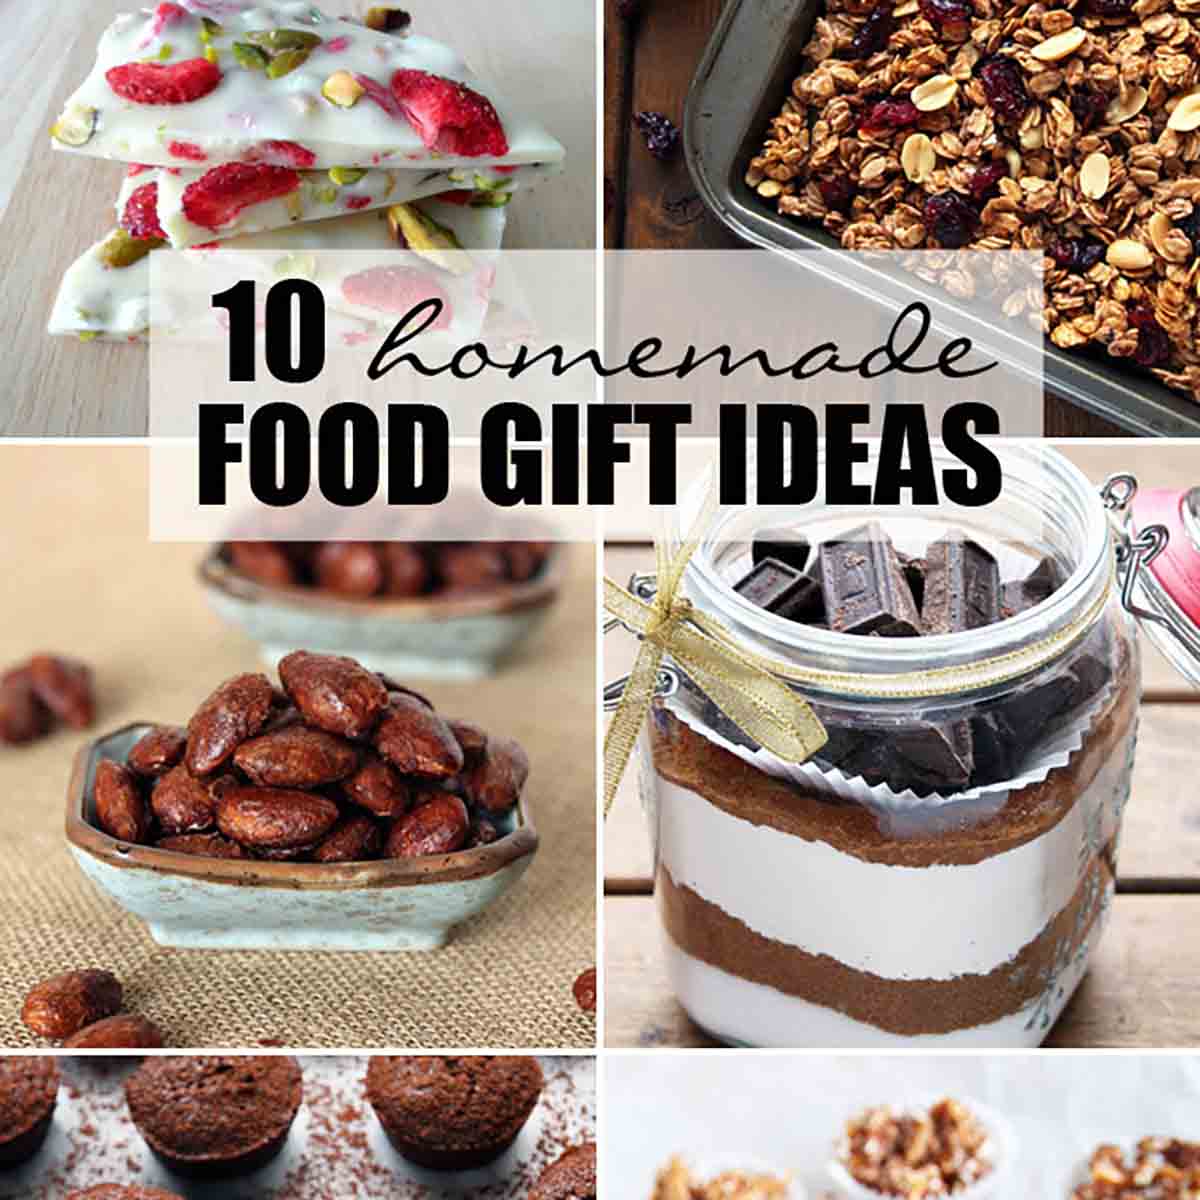 The No-Bake, No-Cook, No-Time Gift Solution - 4 Snack Mix Recipes in a Jar  - Eat at Home